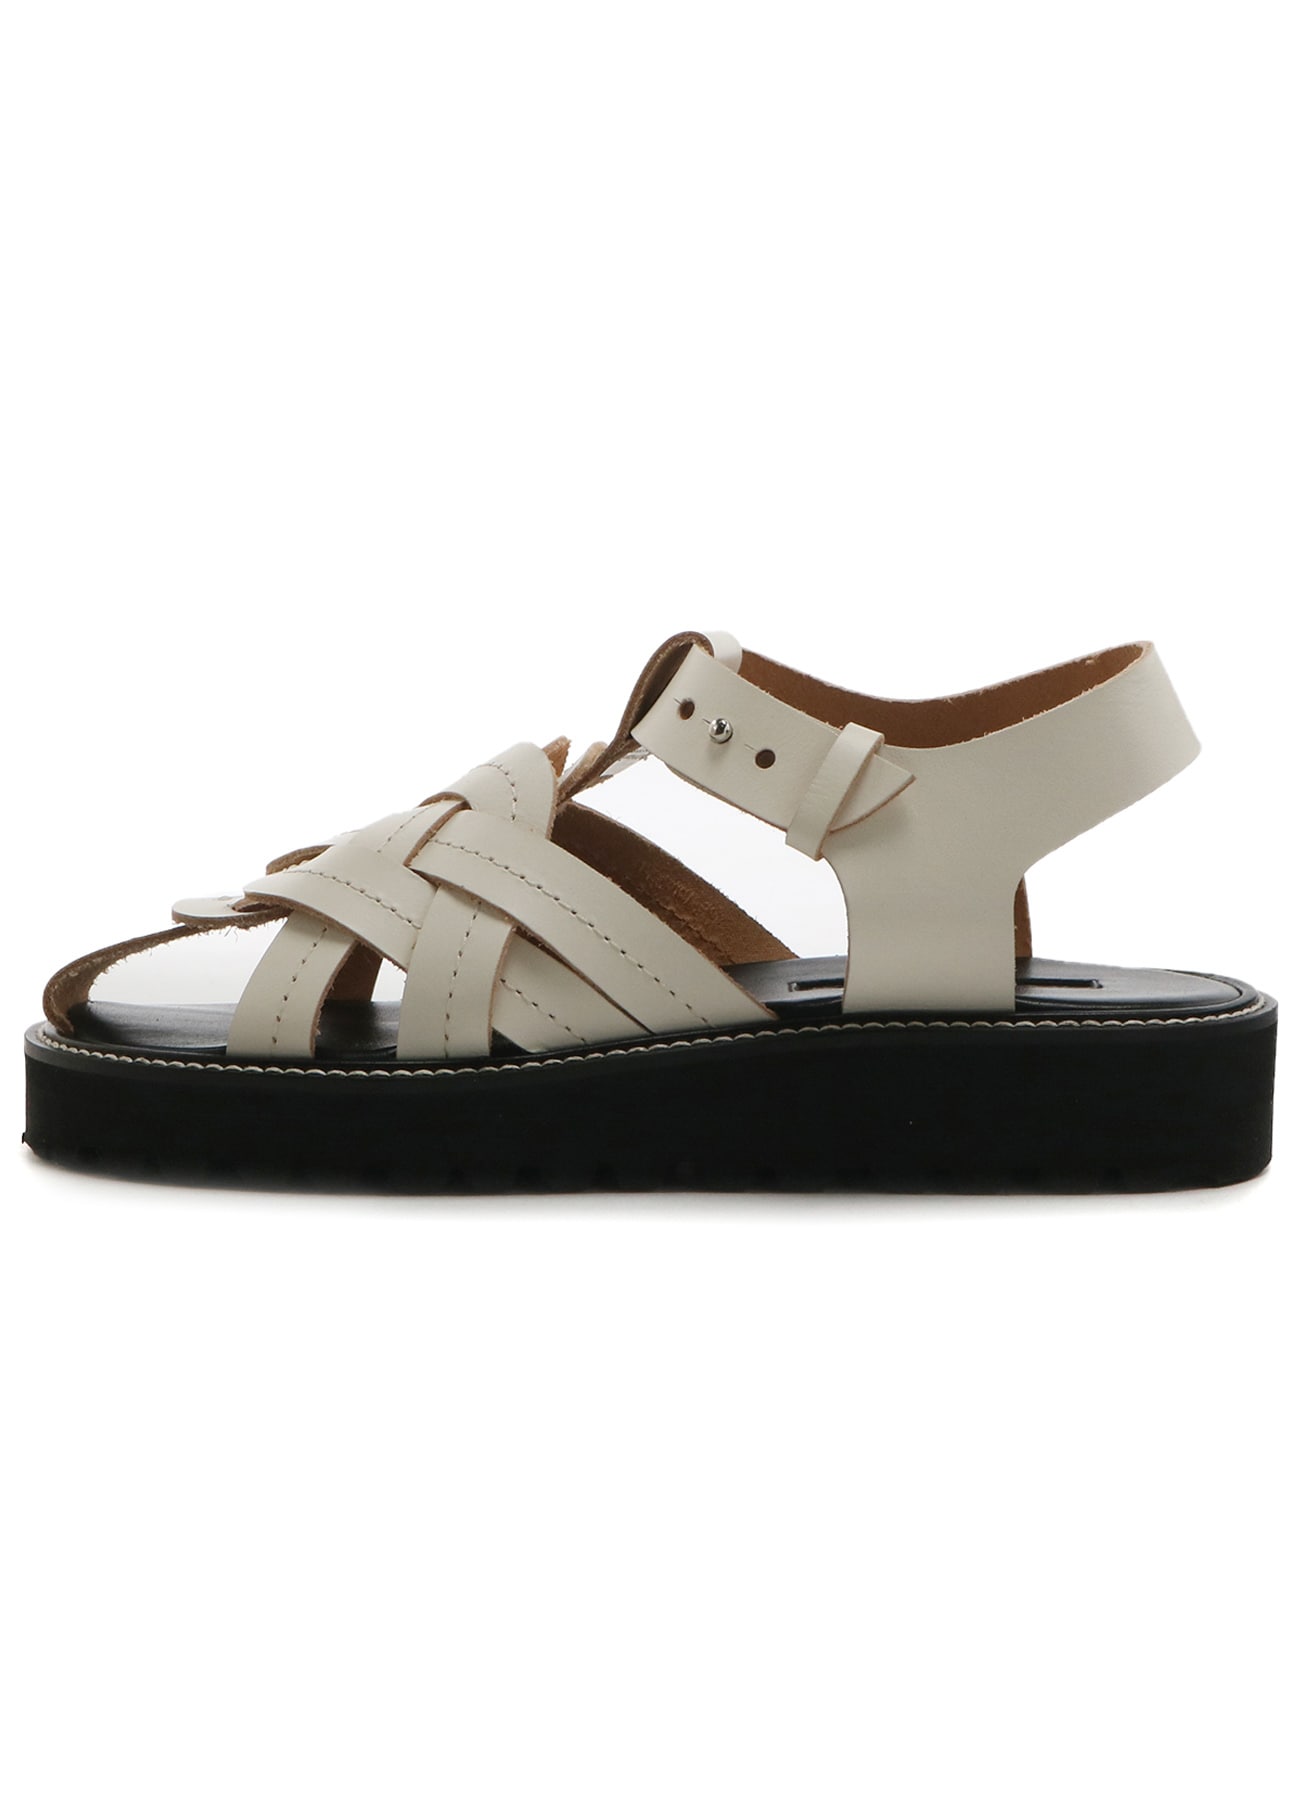 THICK NUME LEATHER A KNITTED SANDALS